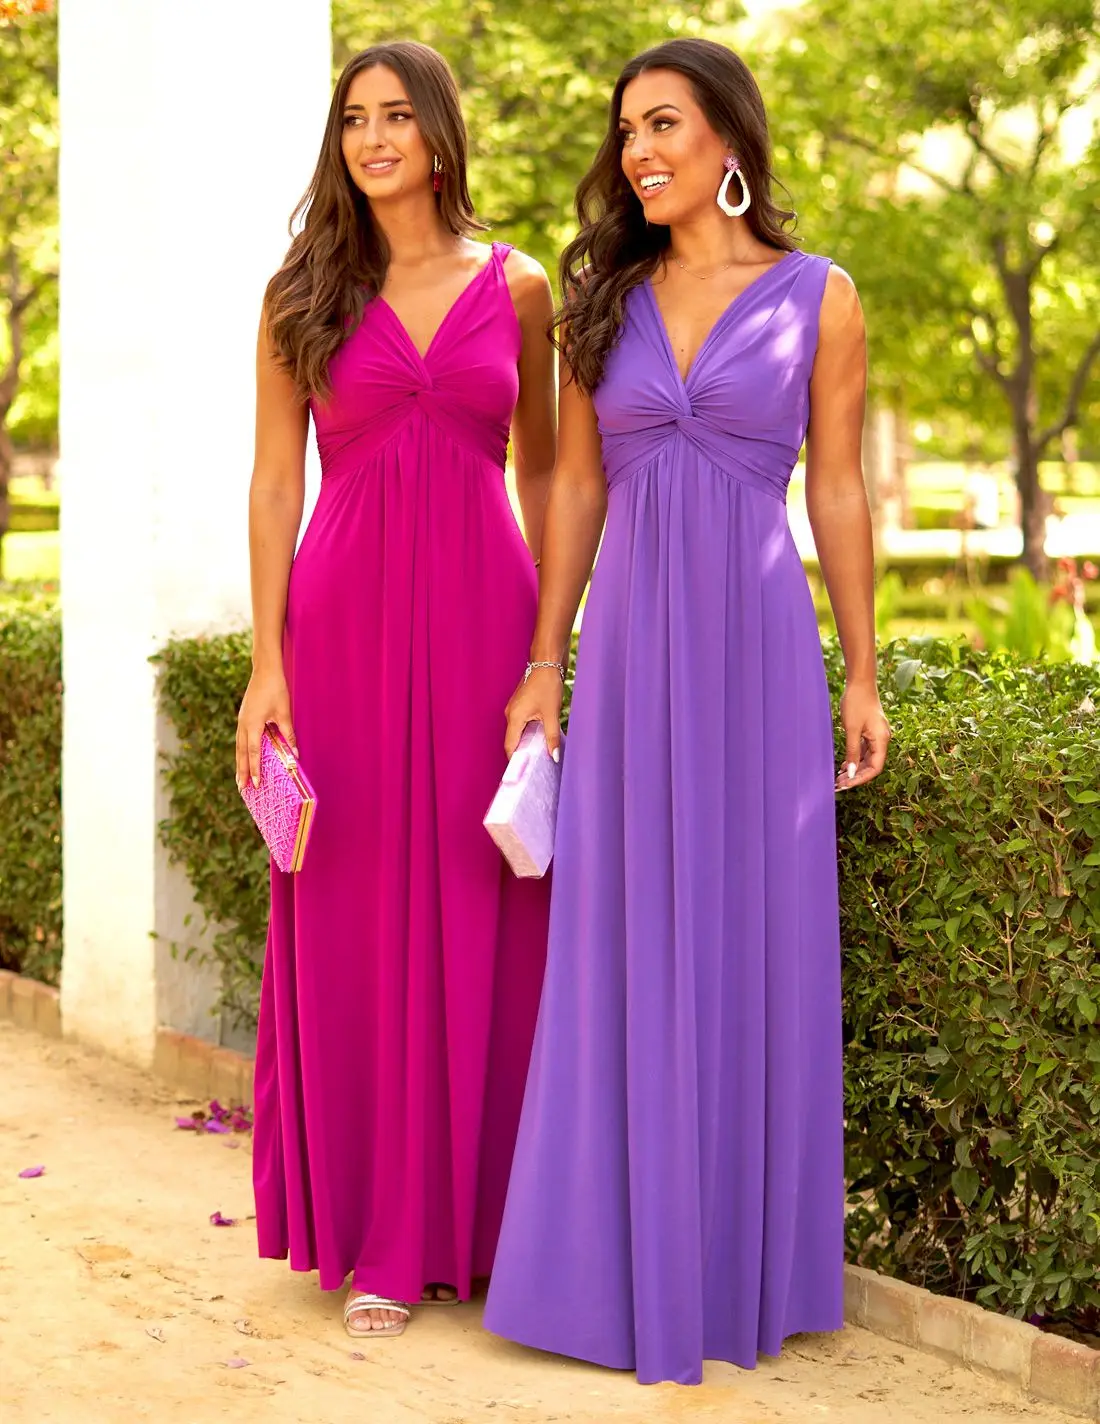 

Elegant V Neck Chiffon Bridesmaid Dresses With Pleat sleeveless A Line Wedding Guest Party Prom Dress Long Formal Evening Gown